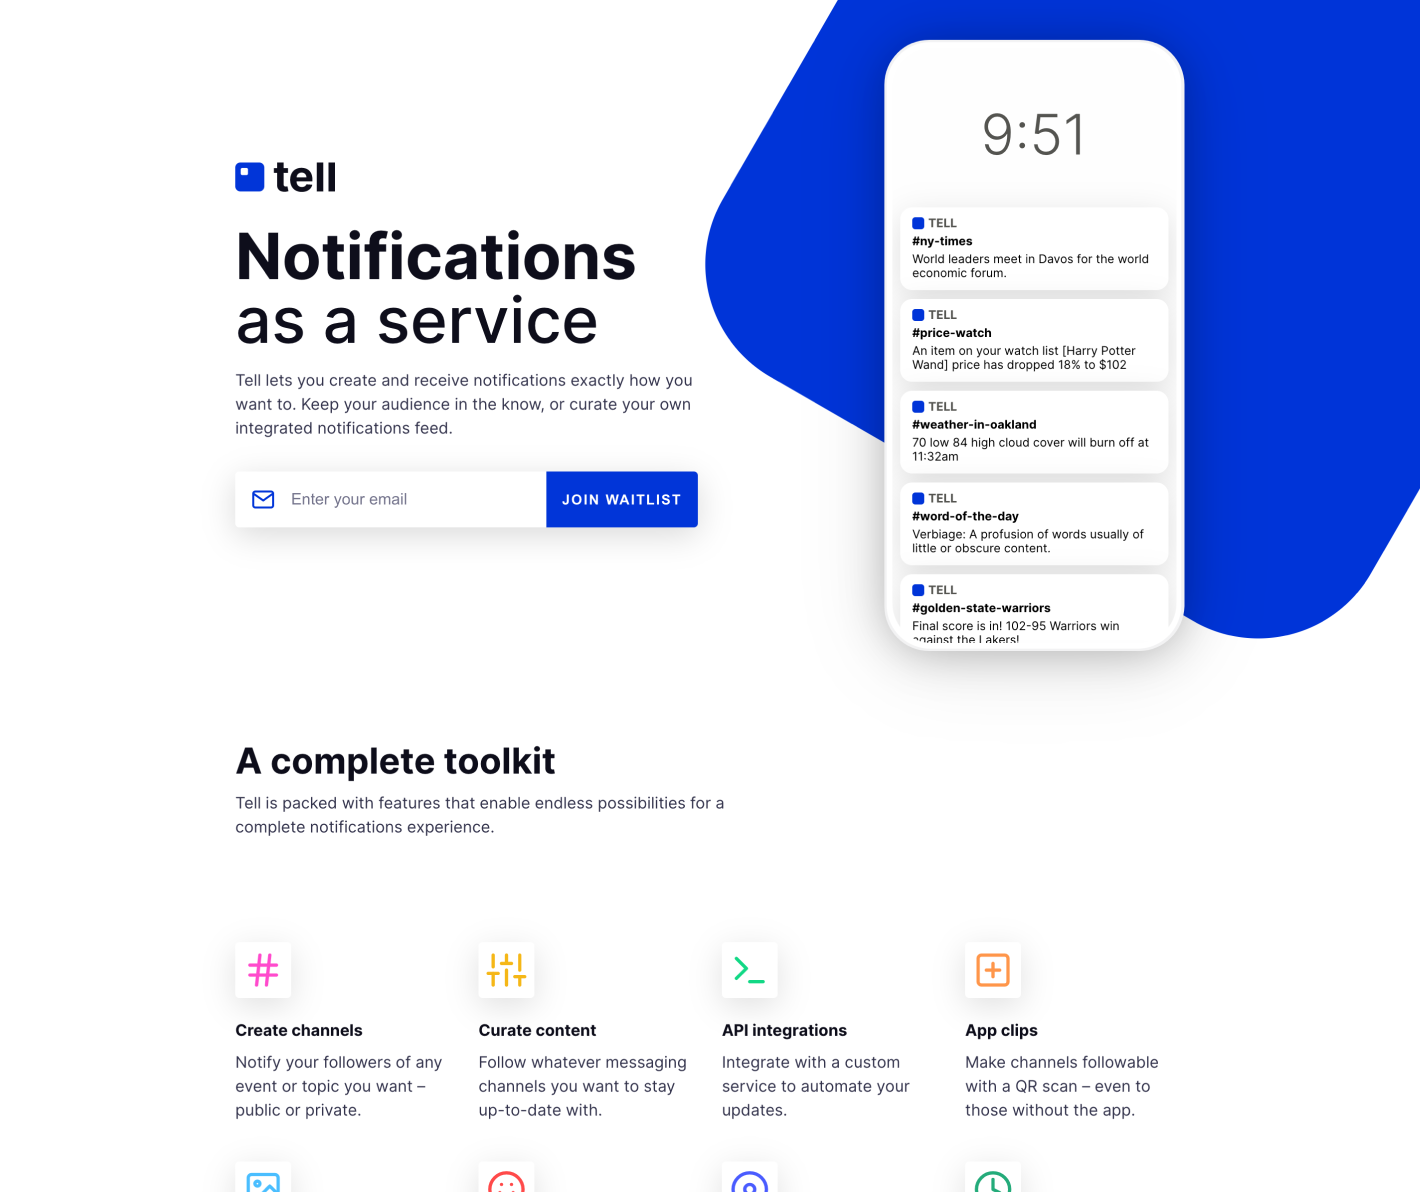 Screenshot of the Tell app landing page